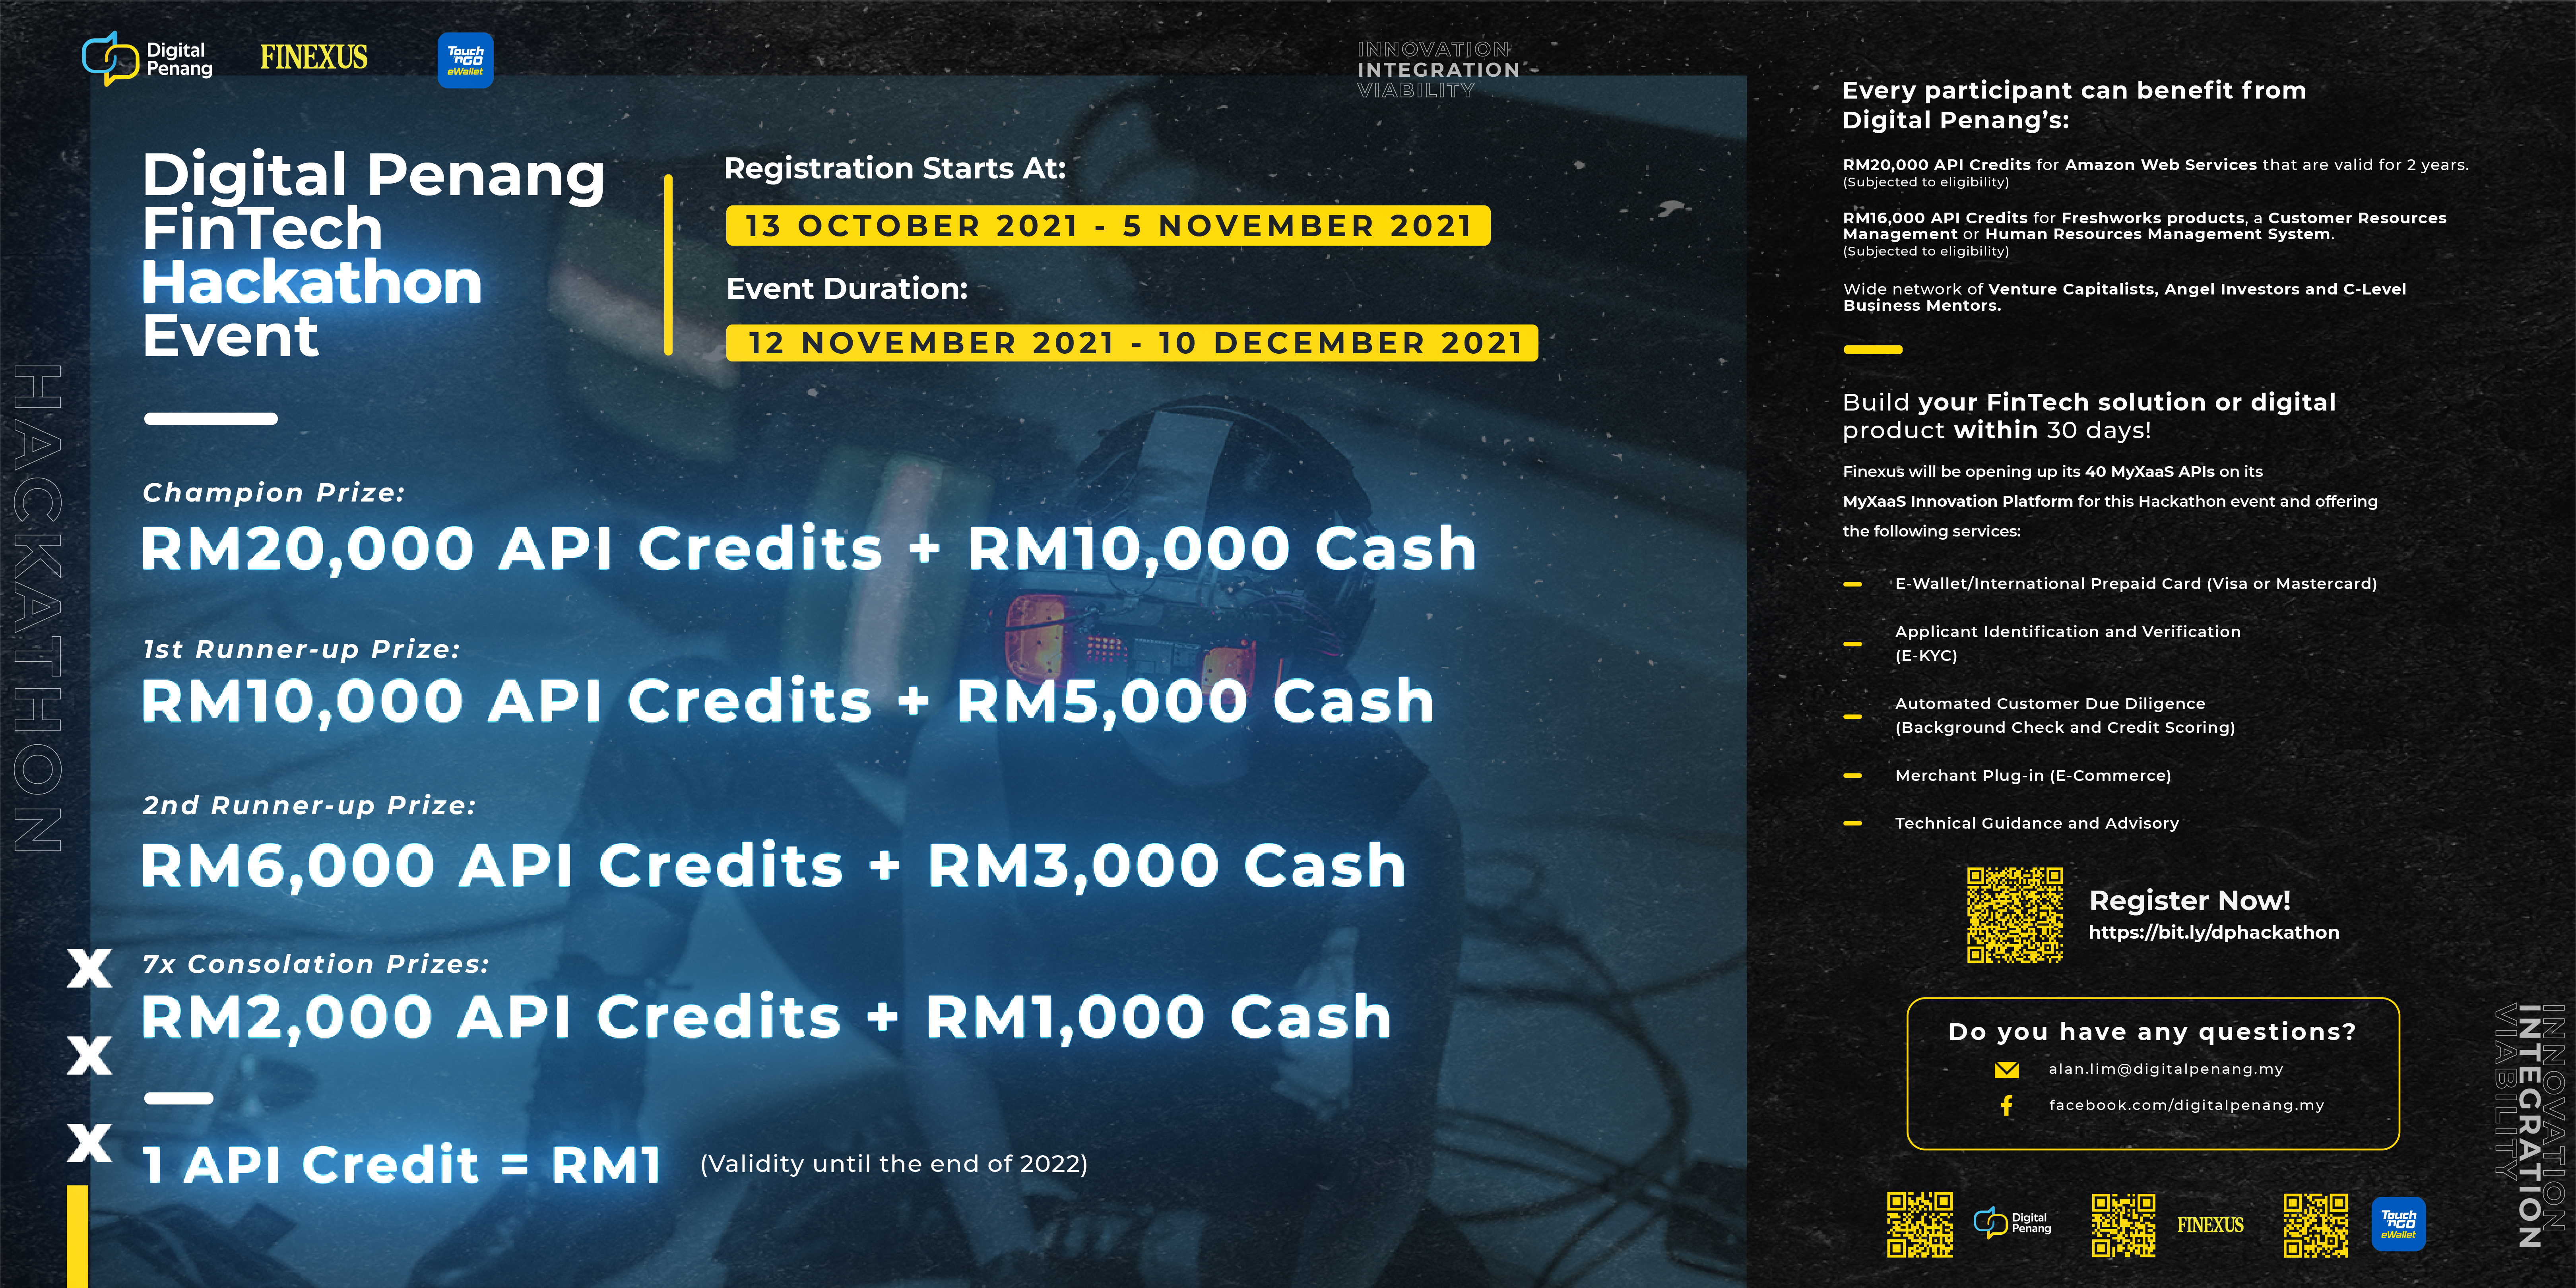 Digital Penang partners Finexus and TNG Digital for fintech hackathon with US$18k prizes 